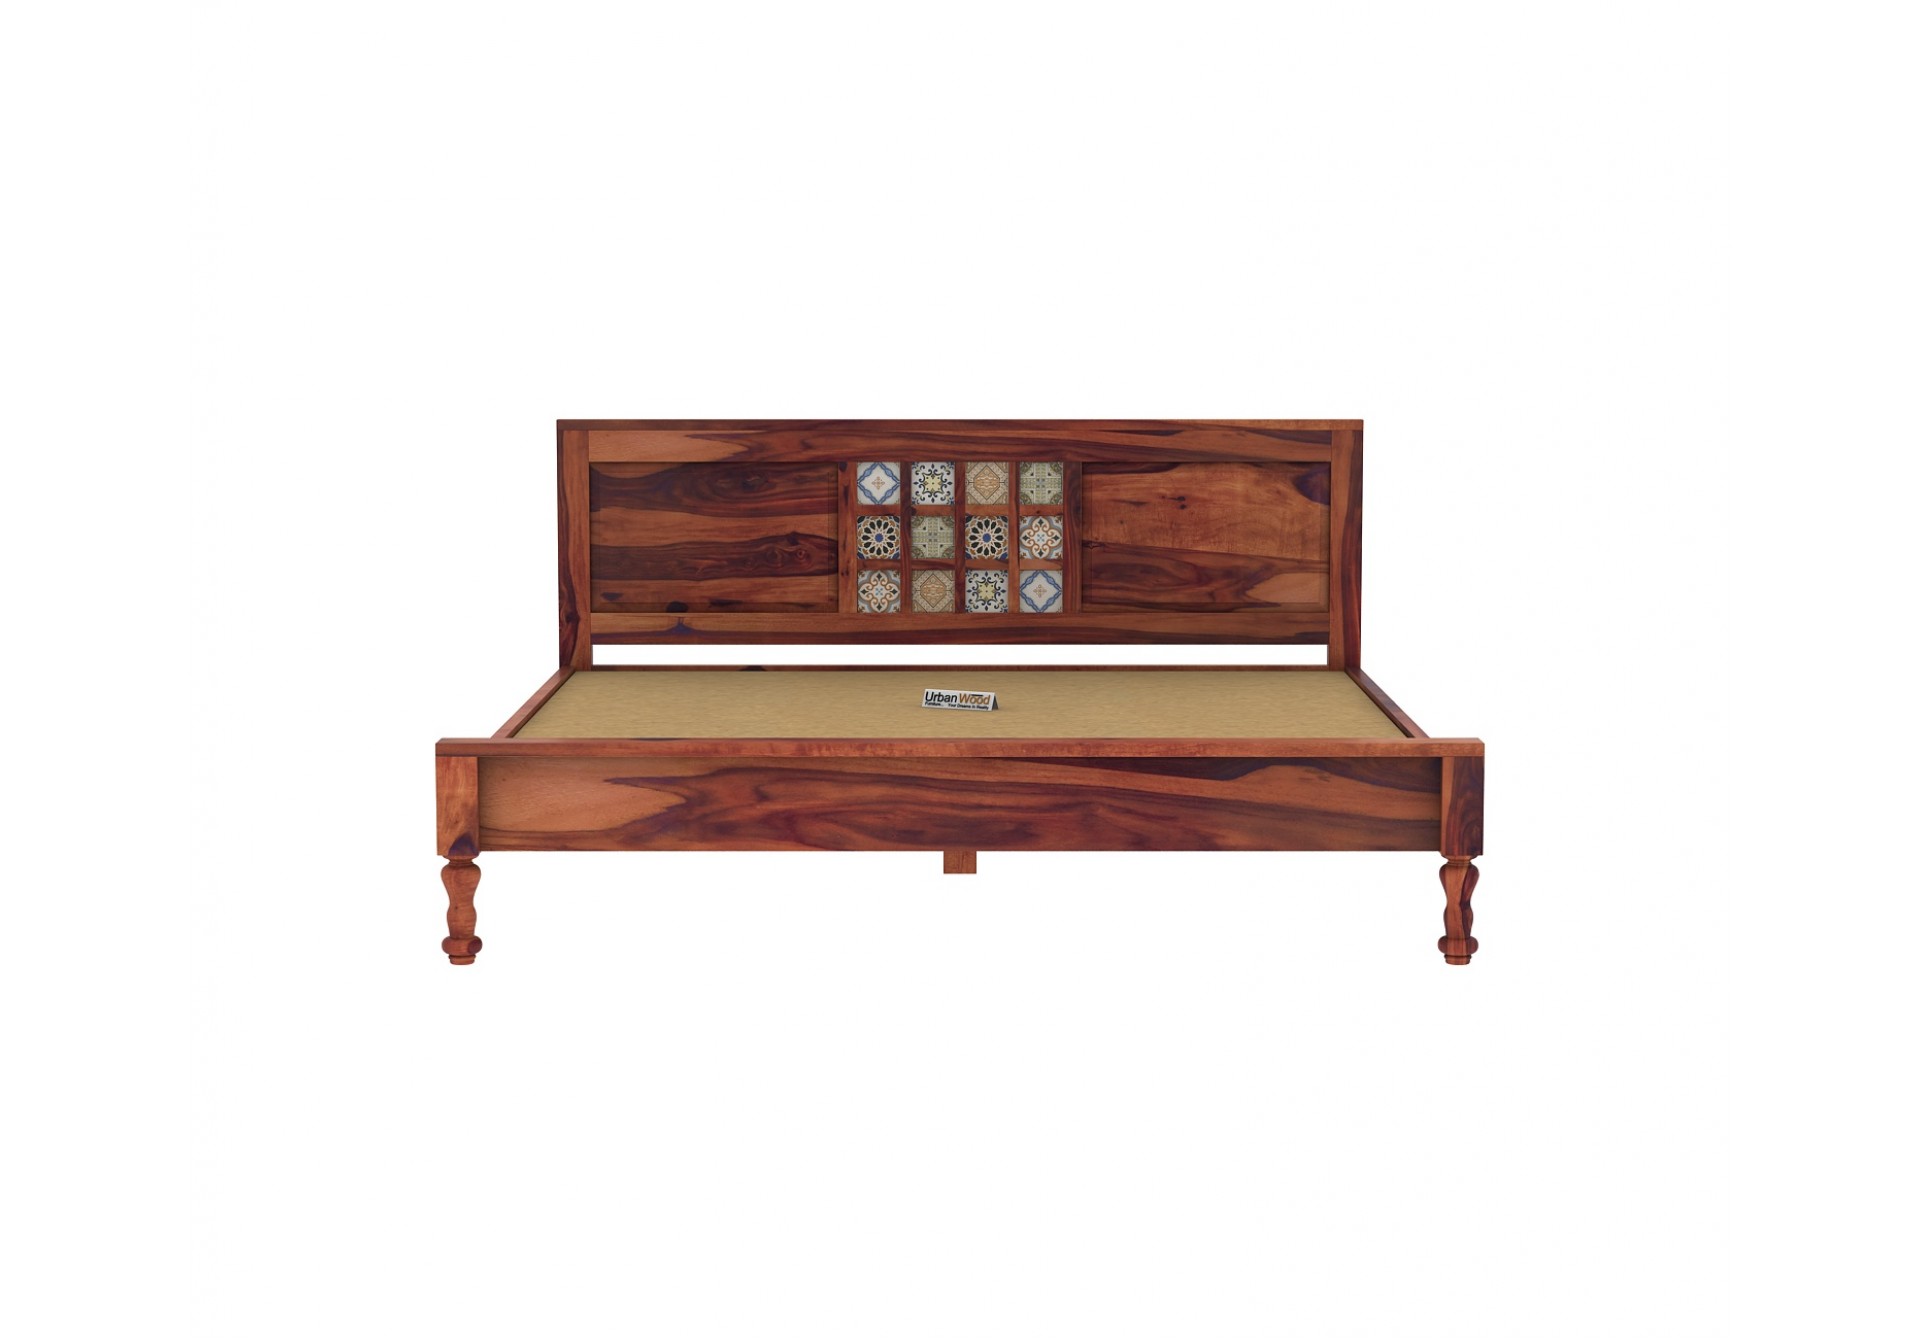 Relay Wooden Bed Without Storage ( Queen Size, Teak Finish )